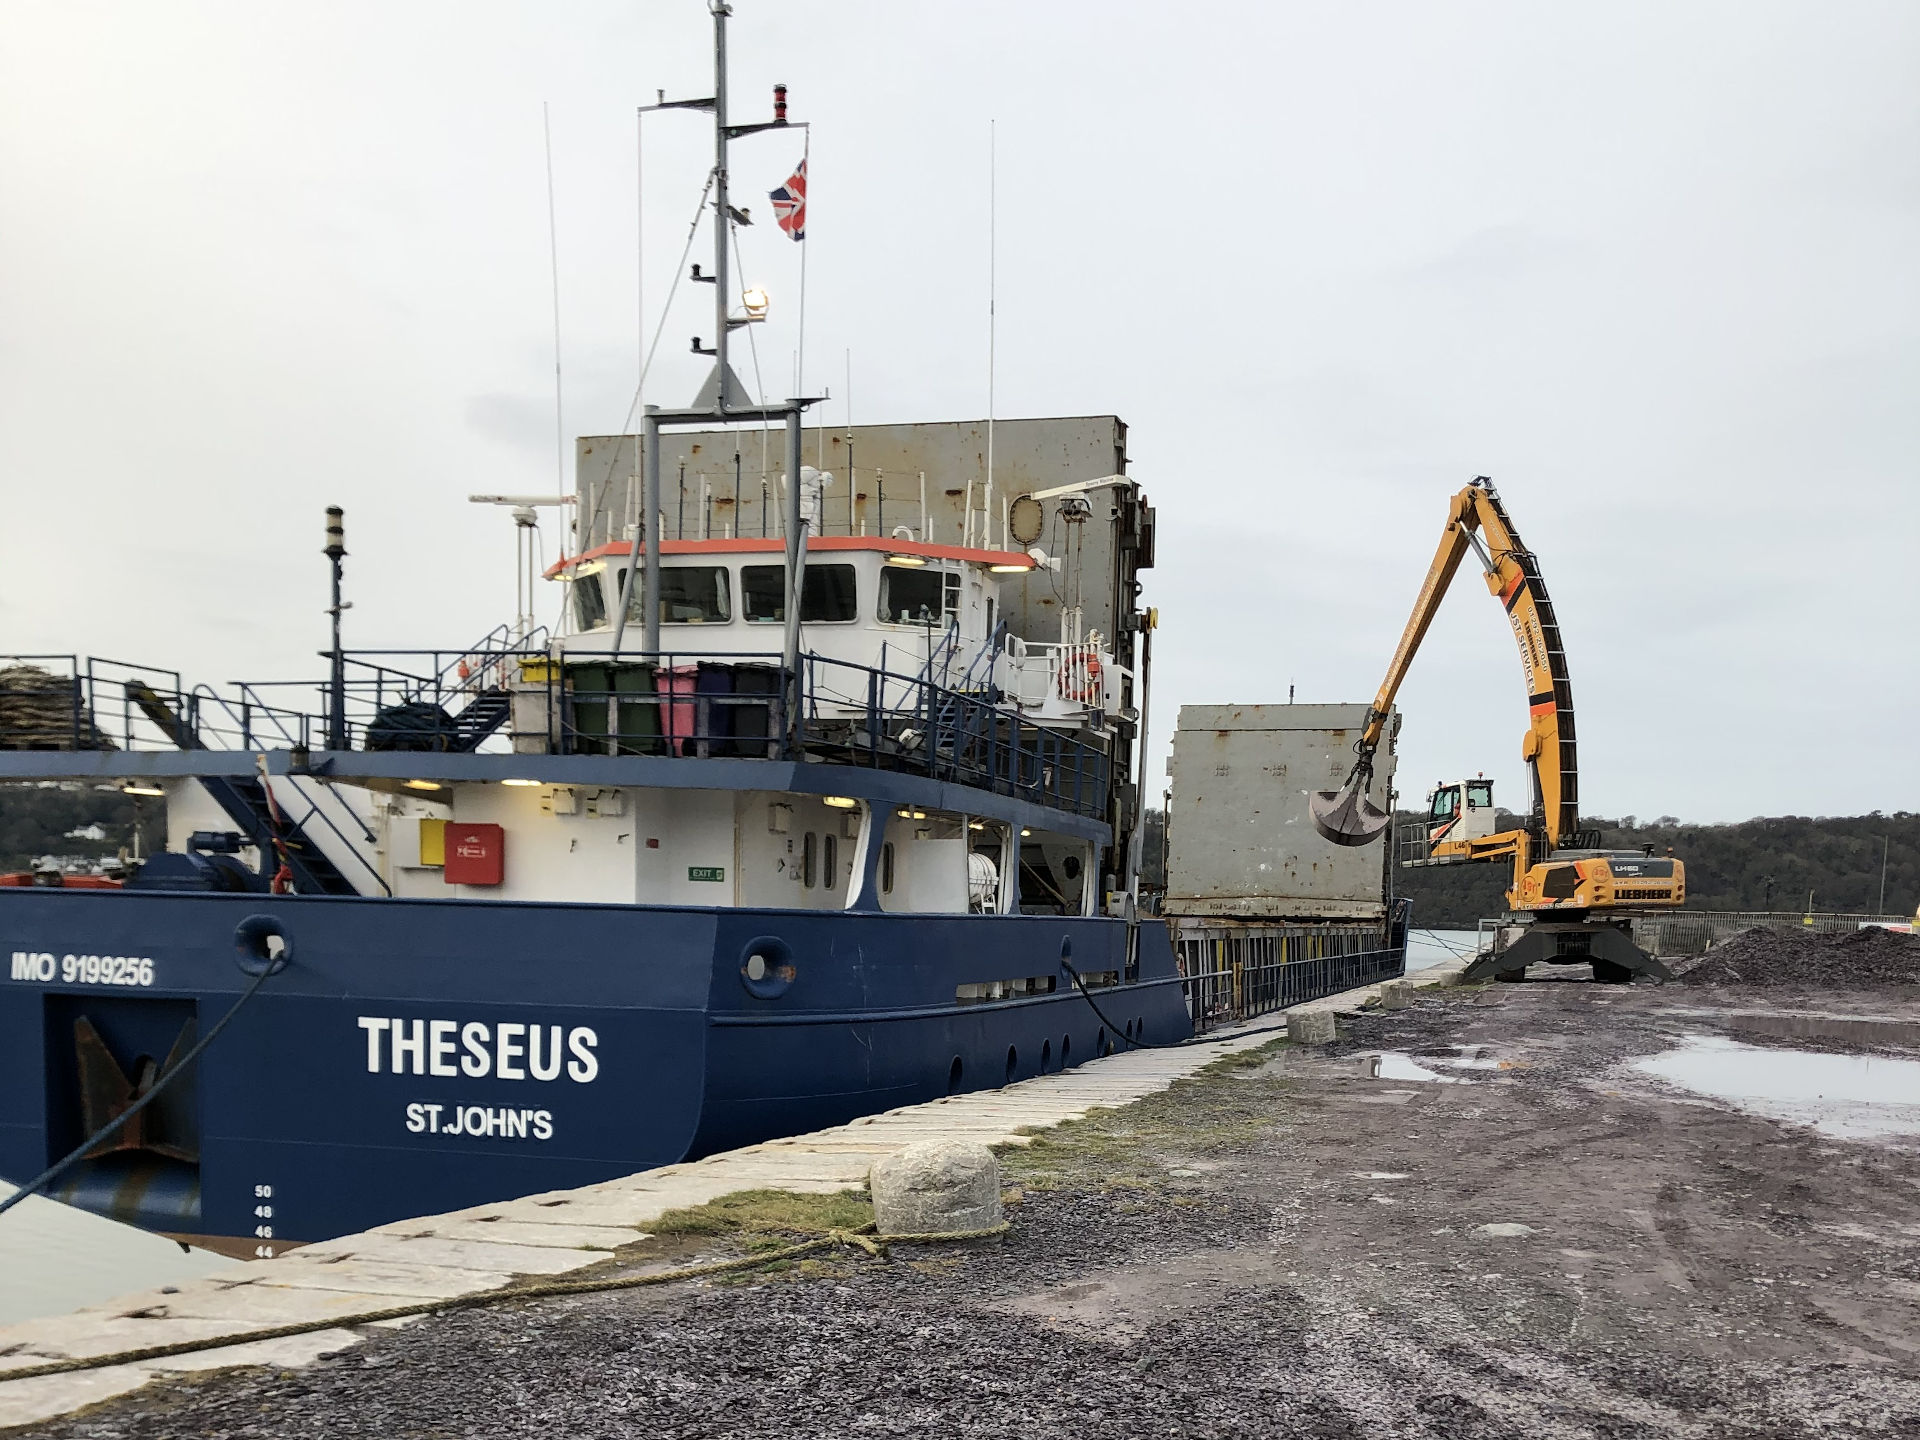 'Theseus' being loaded with aggregate at Port Penrhyn 31 January 2021